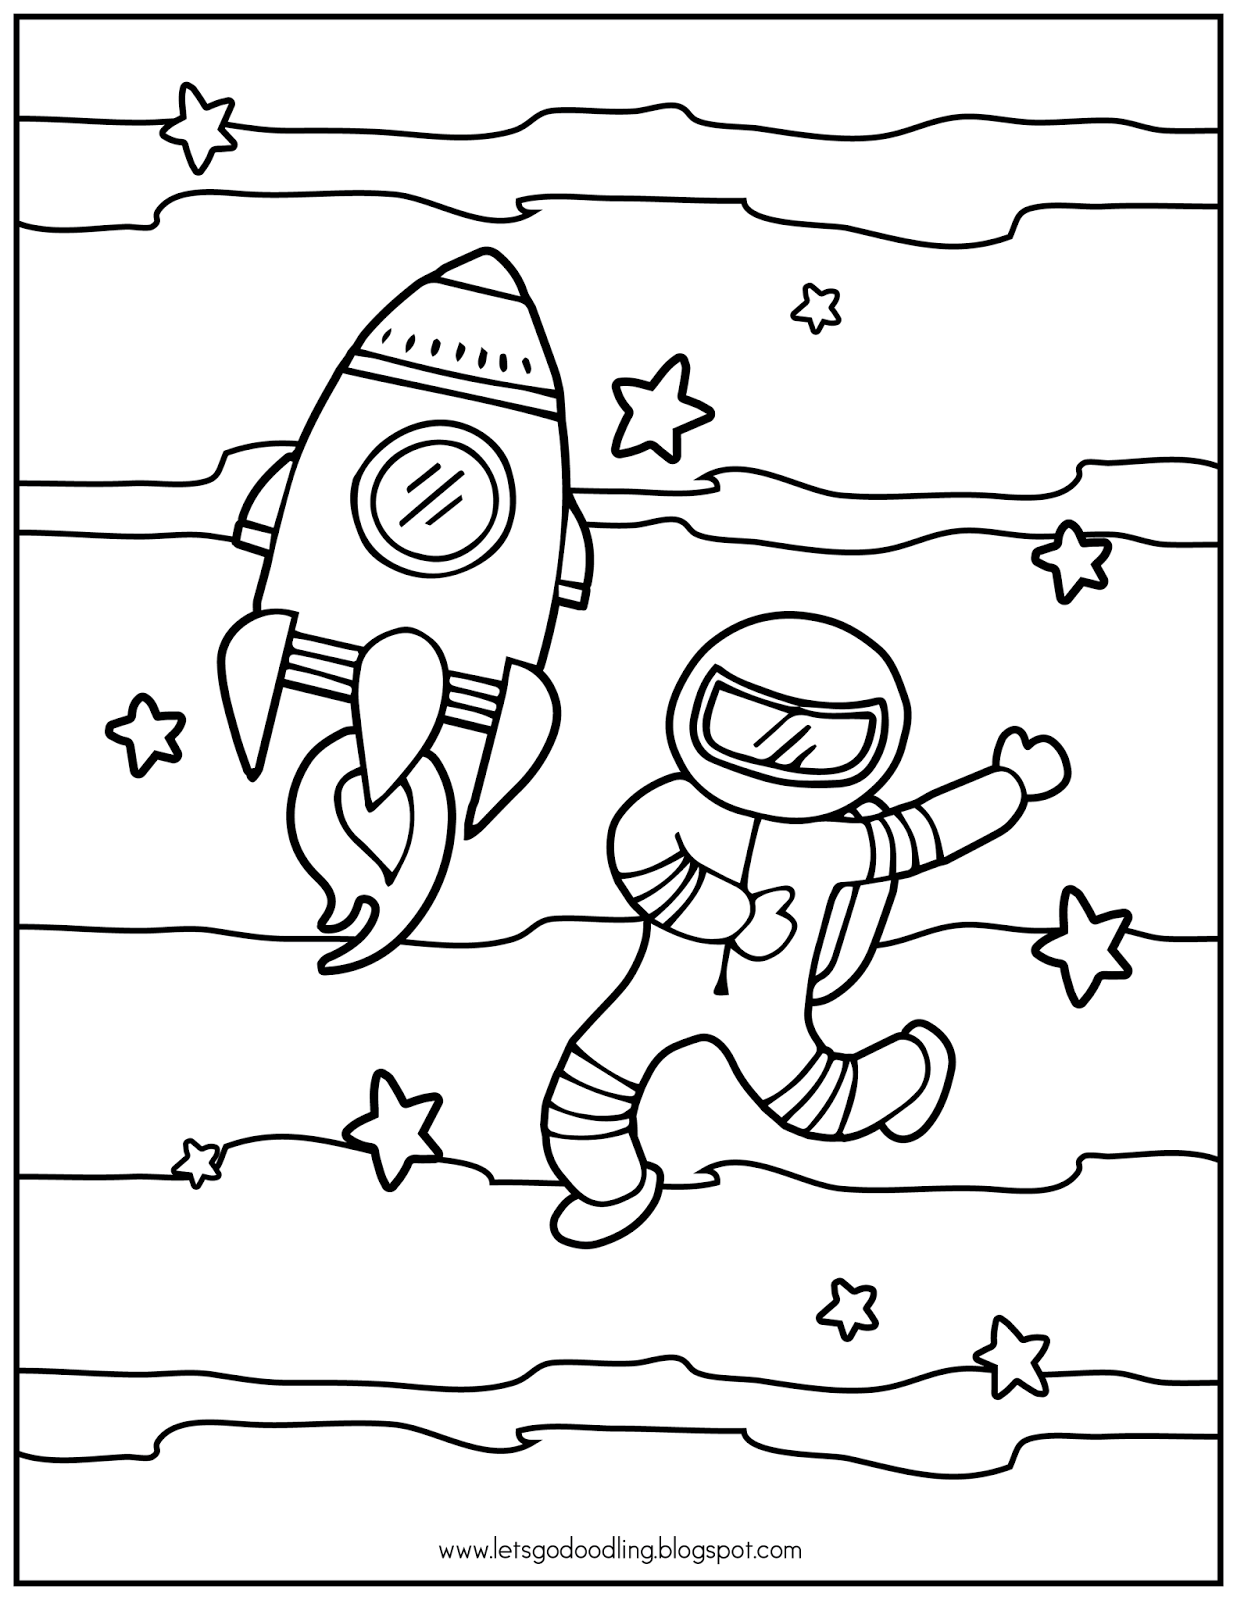 FREE Printable Coloring Page: Astronaut and Space Rocket